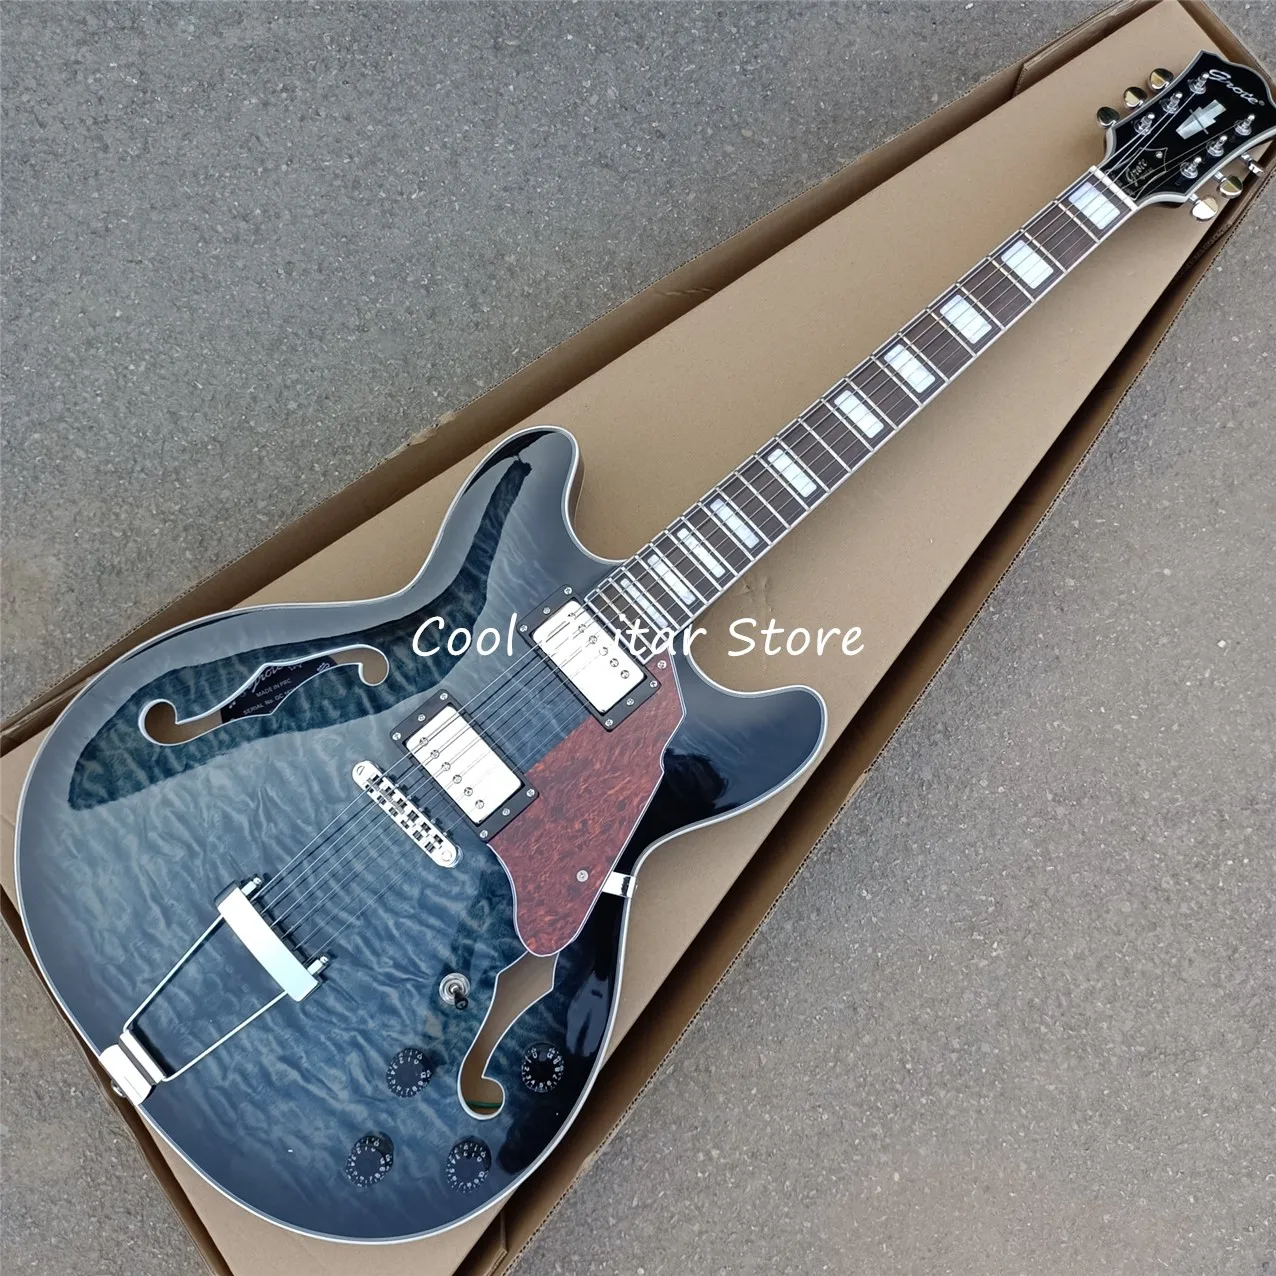 

Grote Electric Guitar, Hollow Body Jazz Model,Tiger Flamed Top,Blue Top,Rosewood Fingerboard,Free Shipping